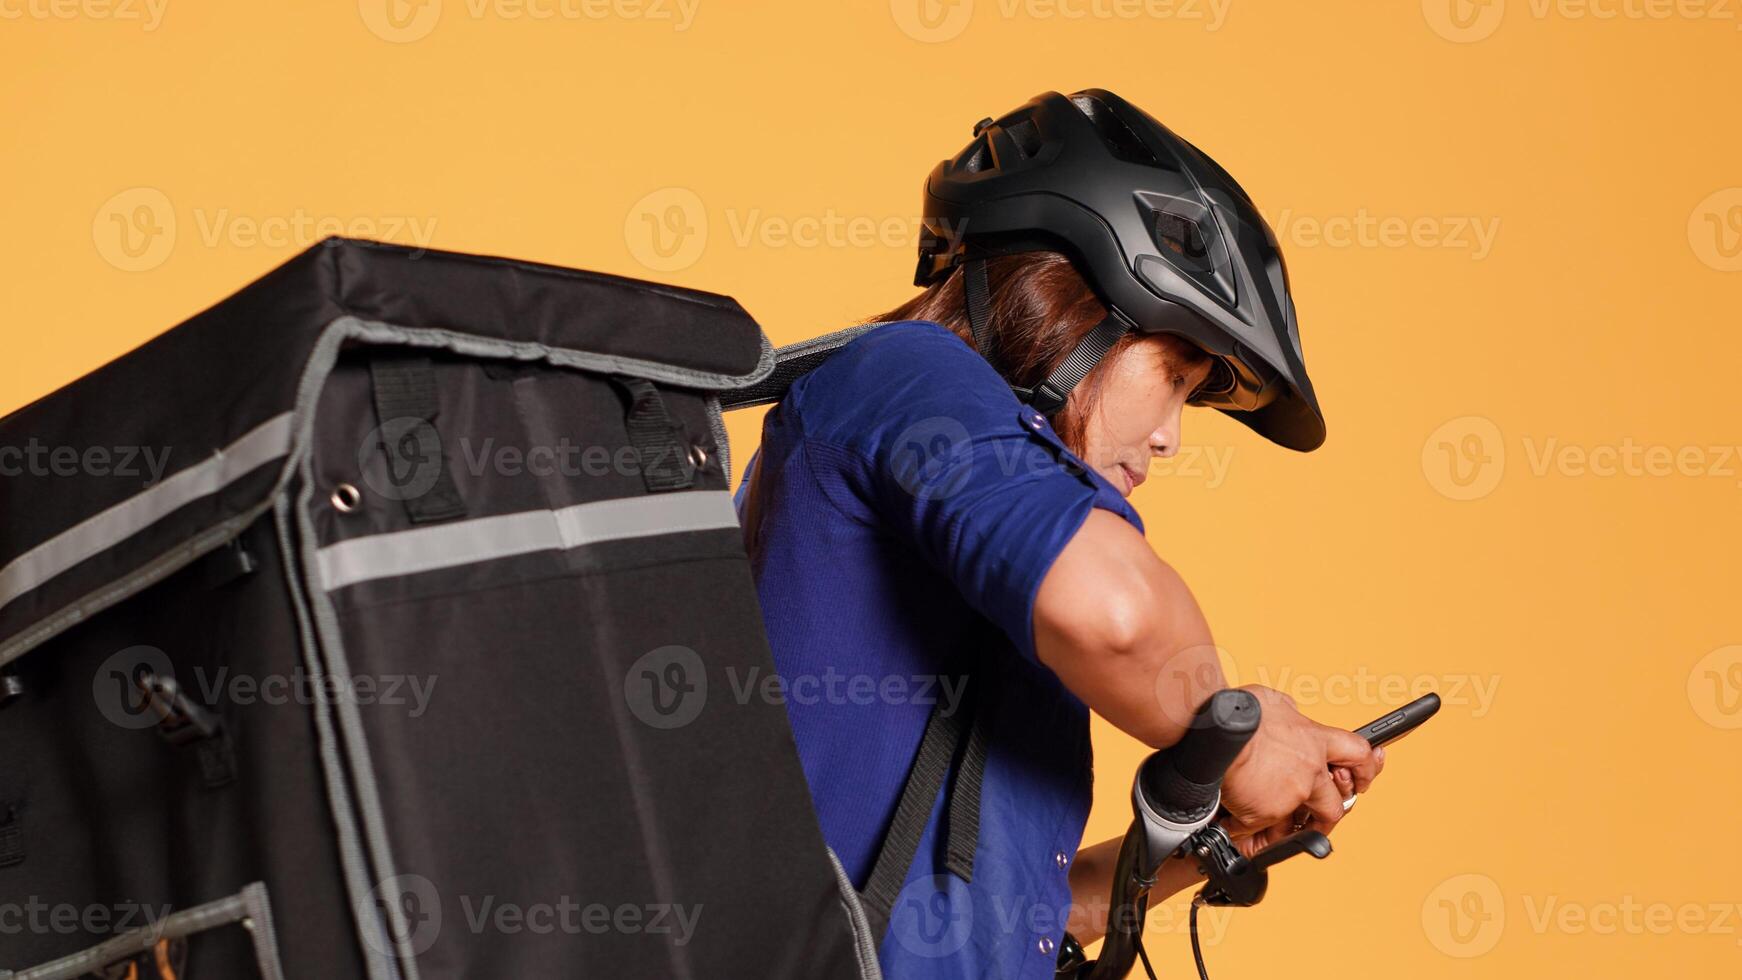 Courier imputing client order in phone app, preparing to ride bicycle to customer location. BIPOC cyclist isolated over orange studio background delivering takeout meals using thermal bag, close up photo